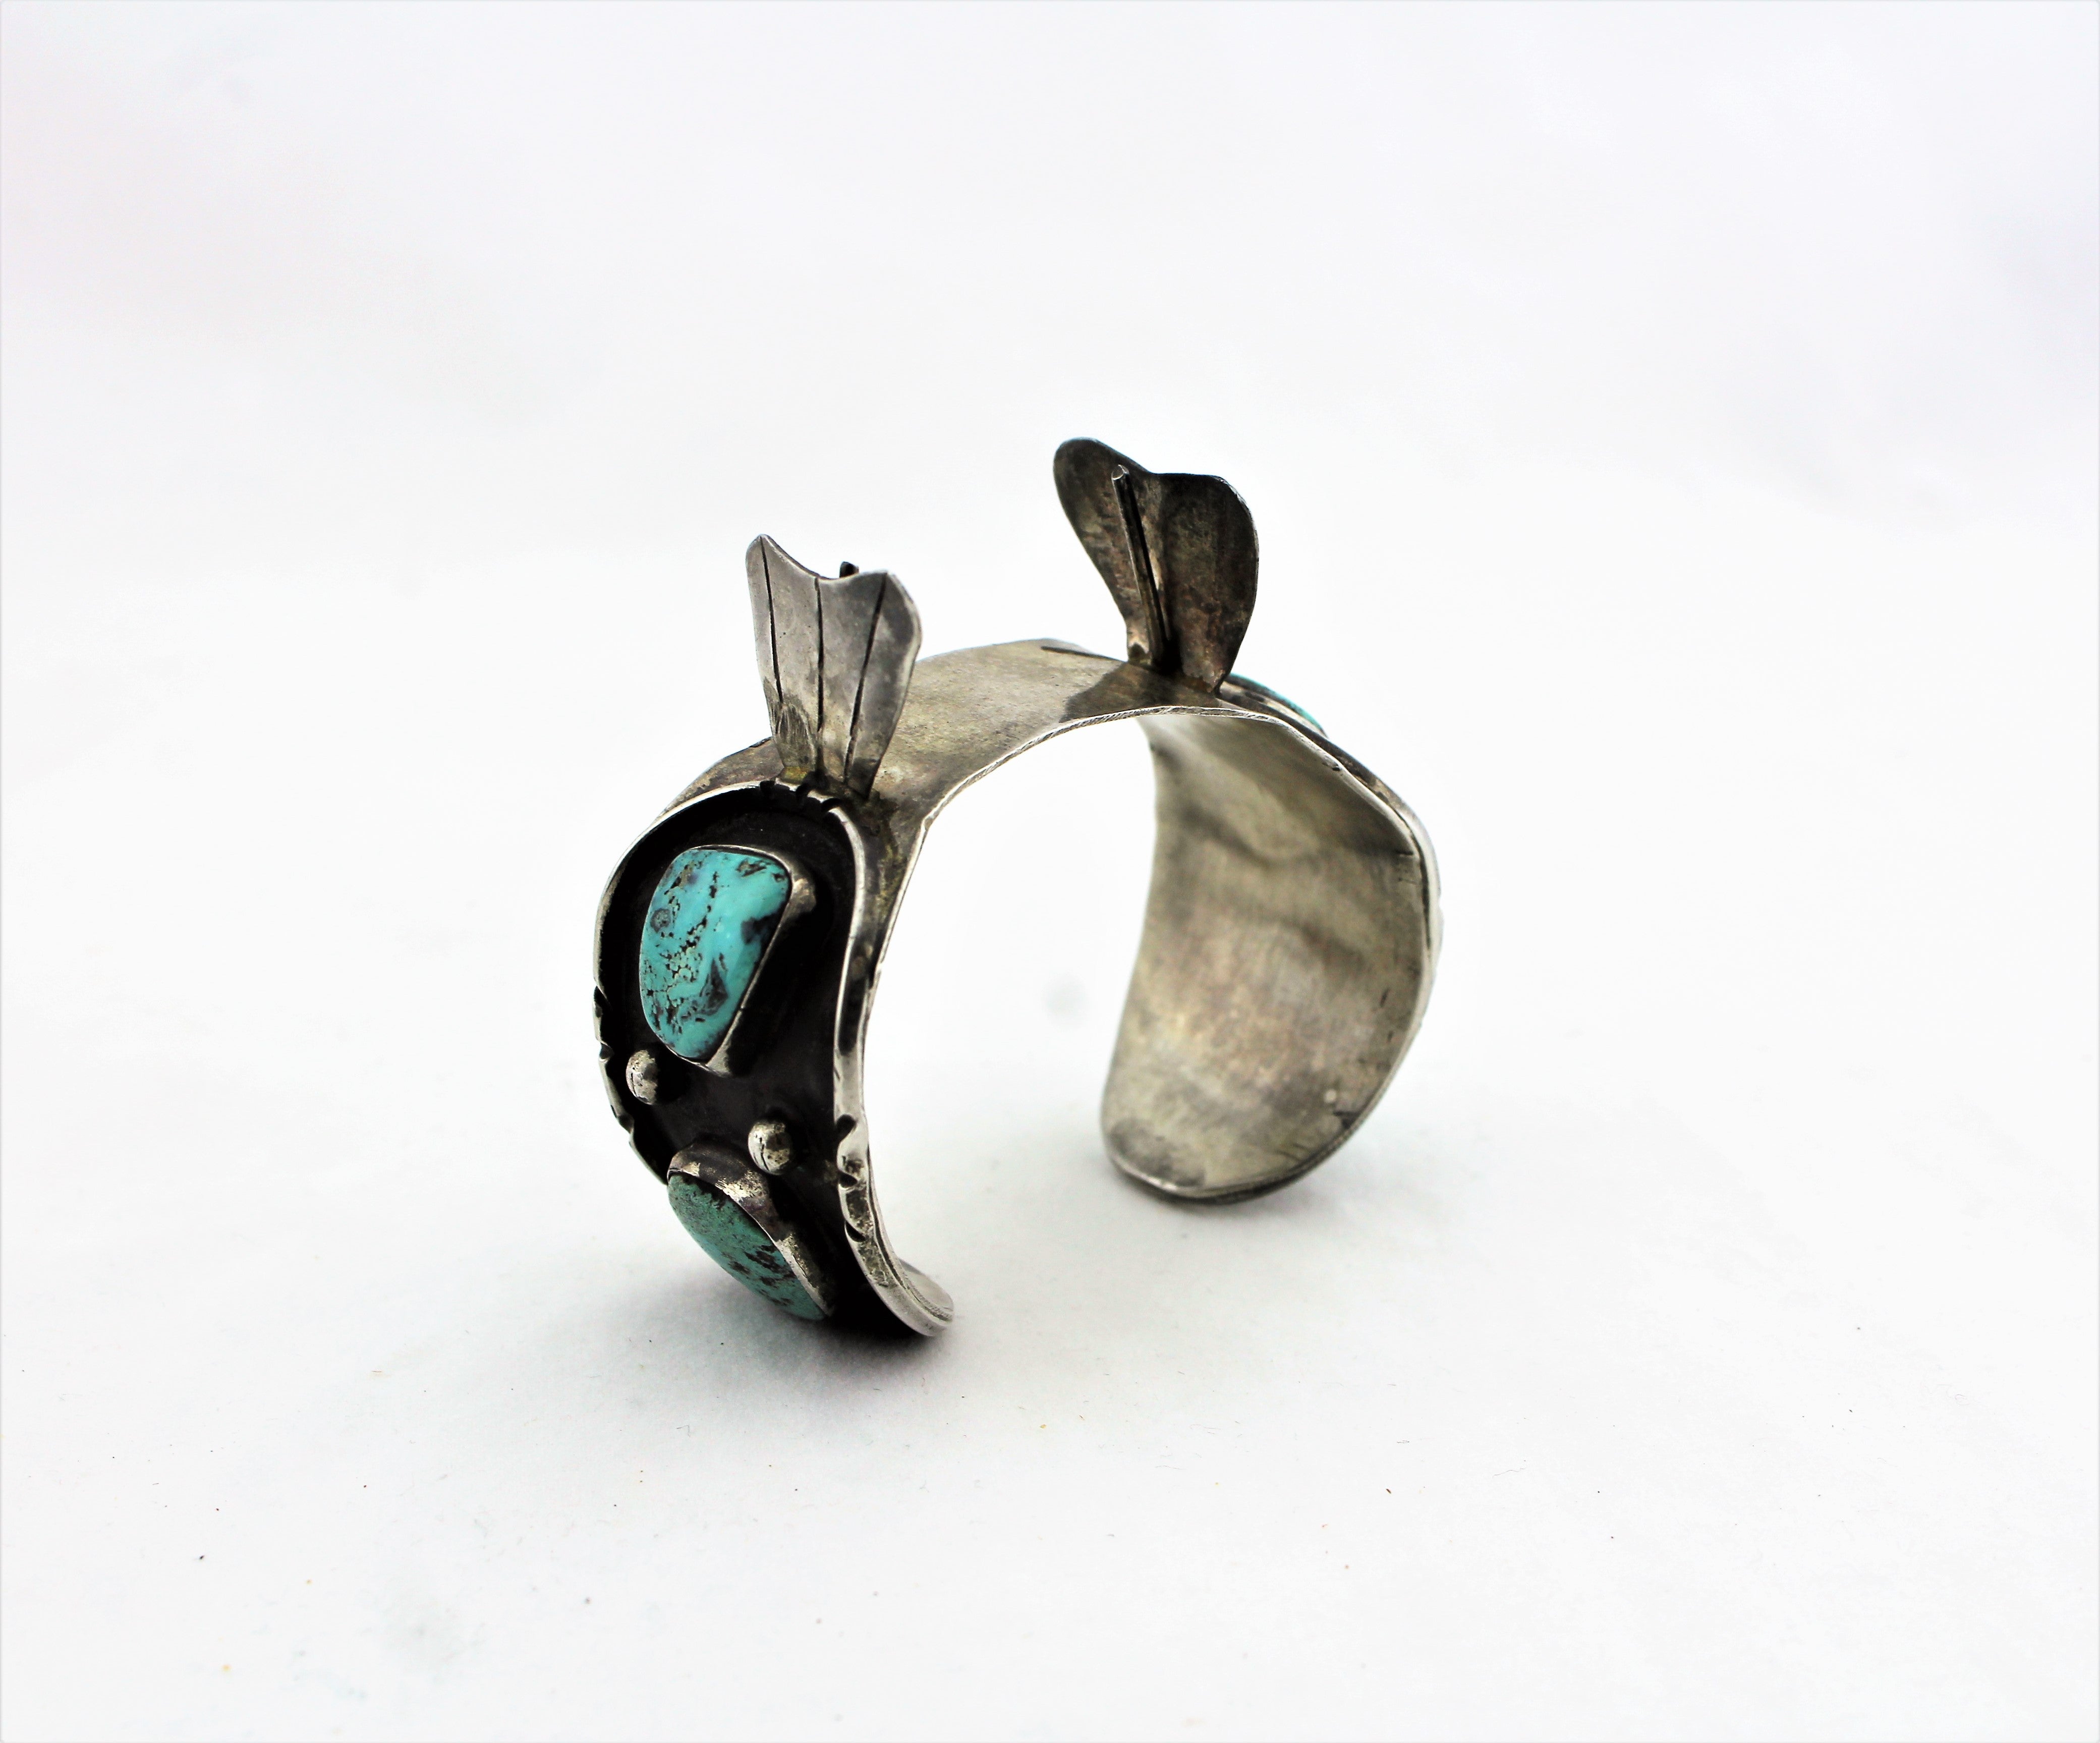 Antique Silver and Turquoise Watch Cuff